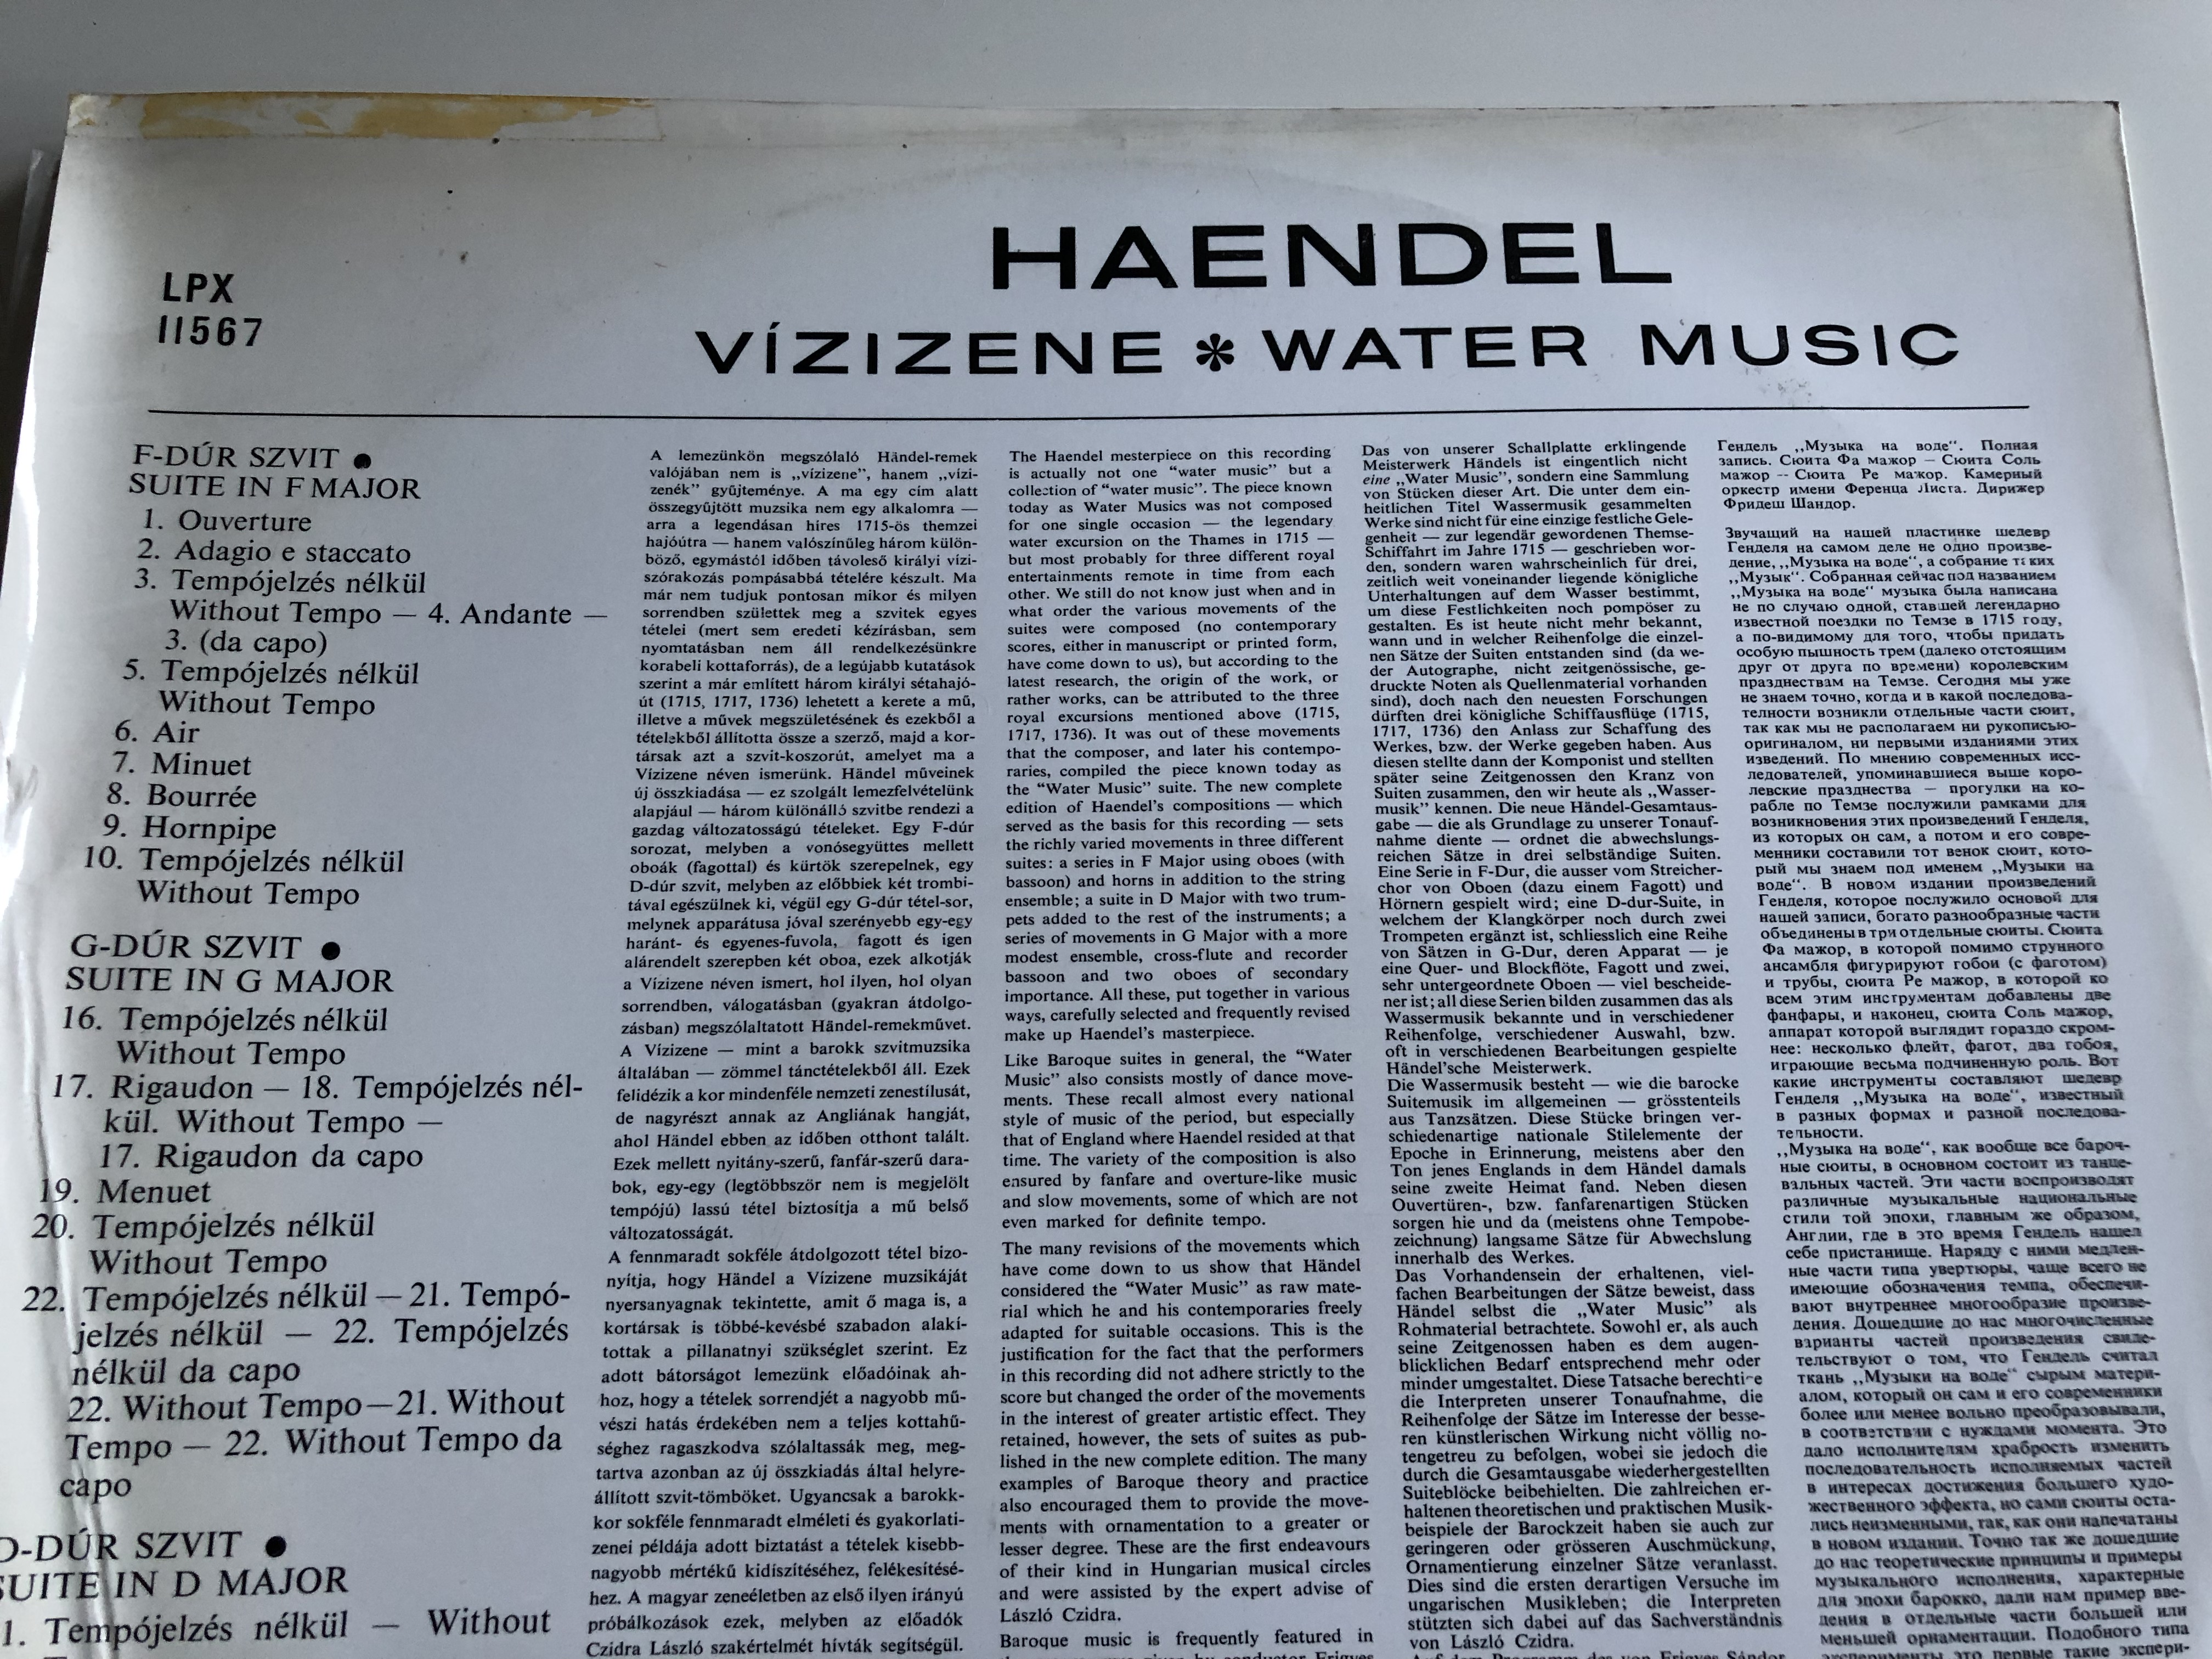 haendel-water-music-complete-liszt-ferenc-chamber-orchestra-conducted-frigyes-s-ndor-hungaroton-lp-stereo-mono-lpx-11567-3-.jpg